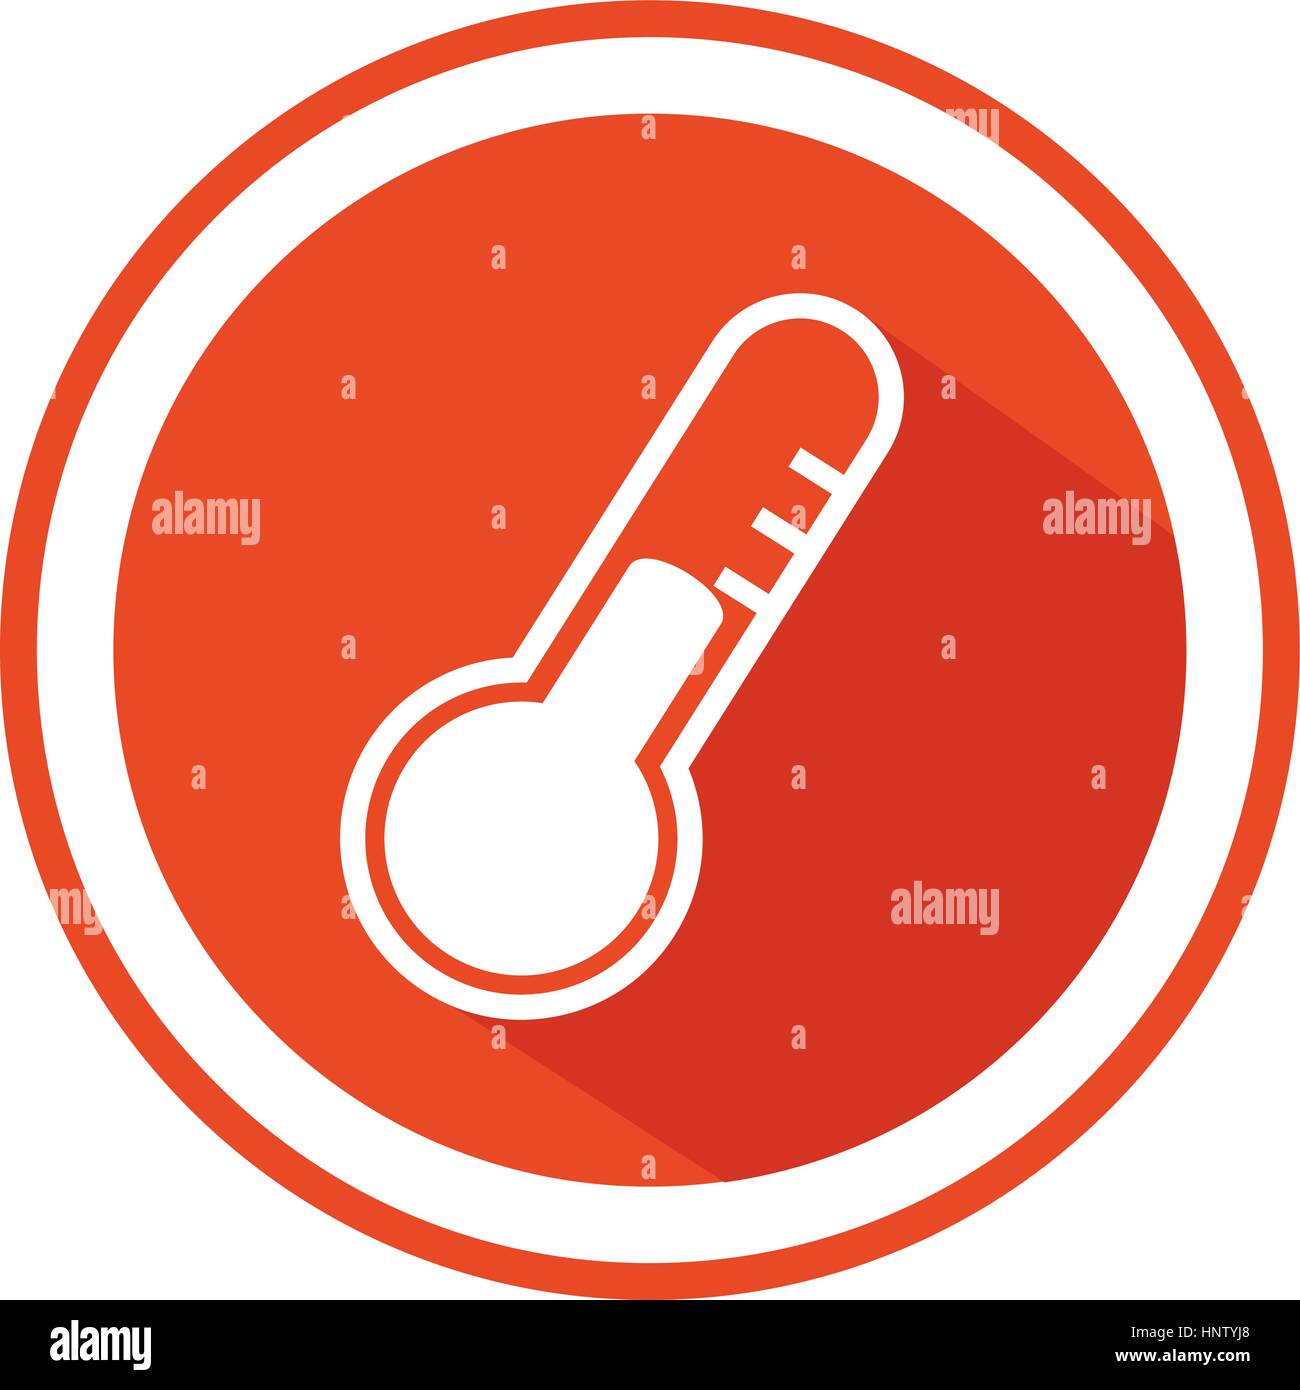 color circular emblem with thermometer vector illustration Stock Vector